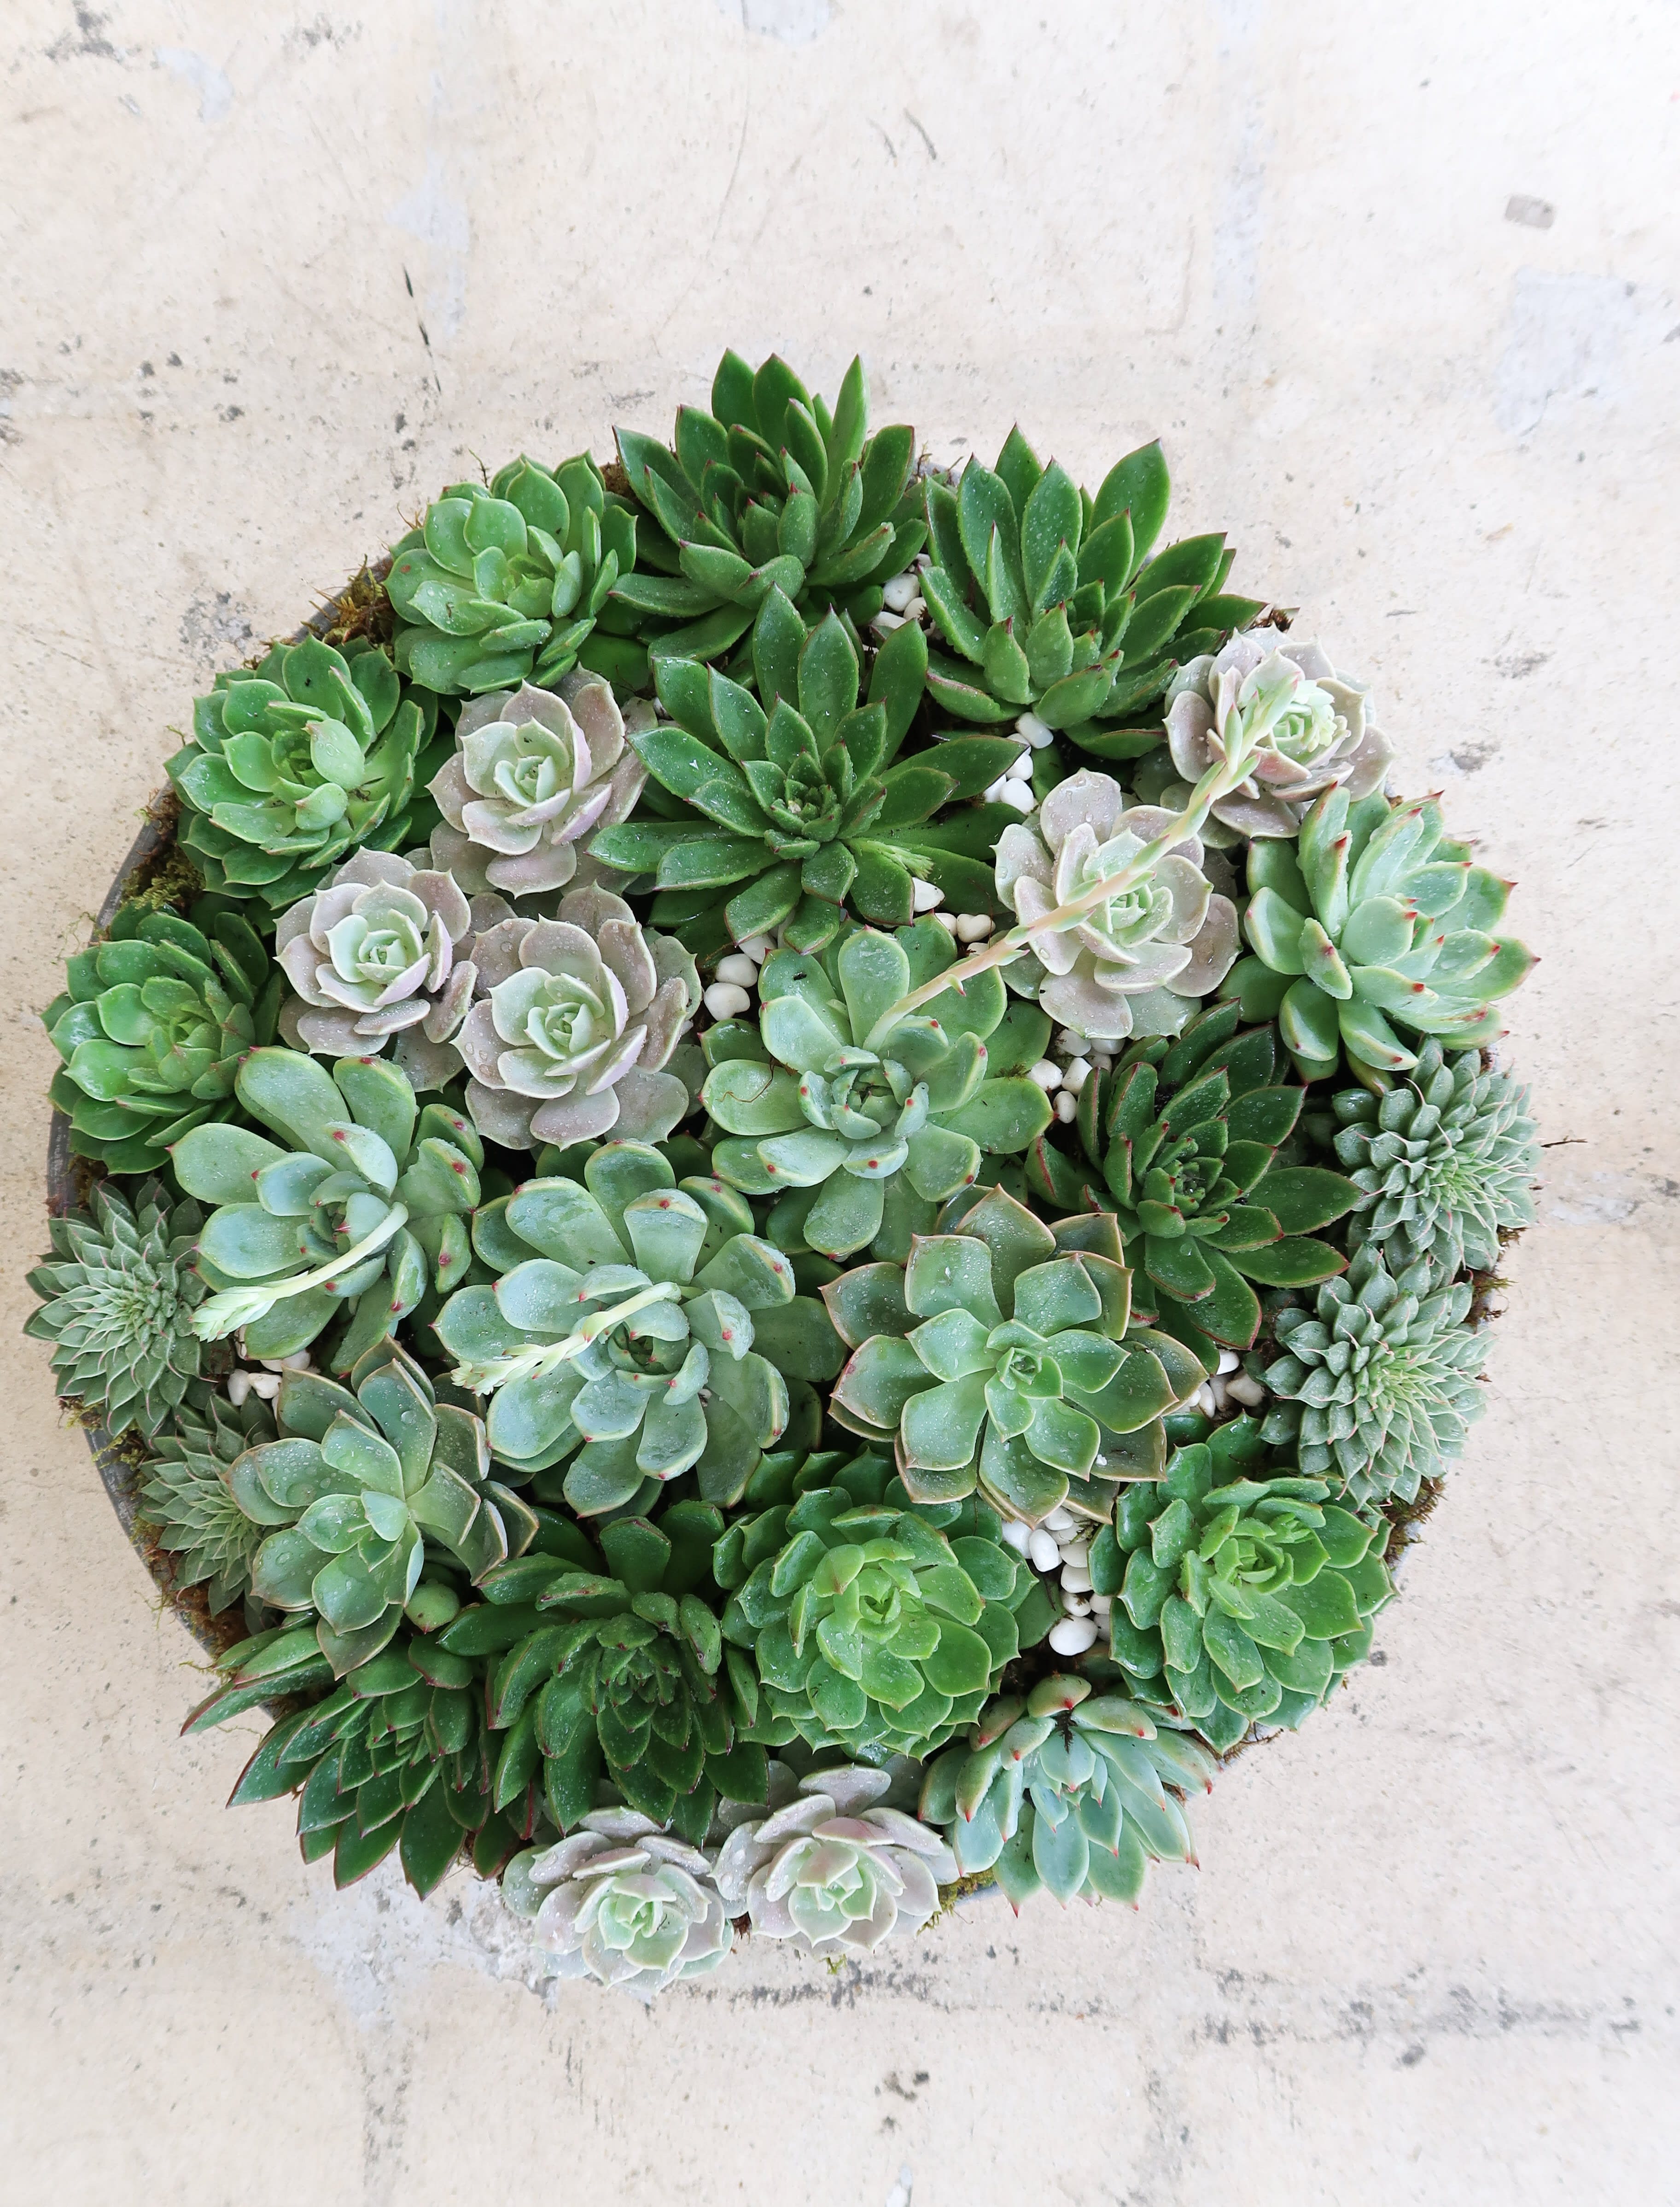 Grand Succulent Garden - Mother’s Day 2021 Exclusive Collection. A grand succulent garden just for mom, filled with assorted succulent blooms. 